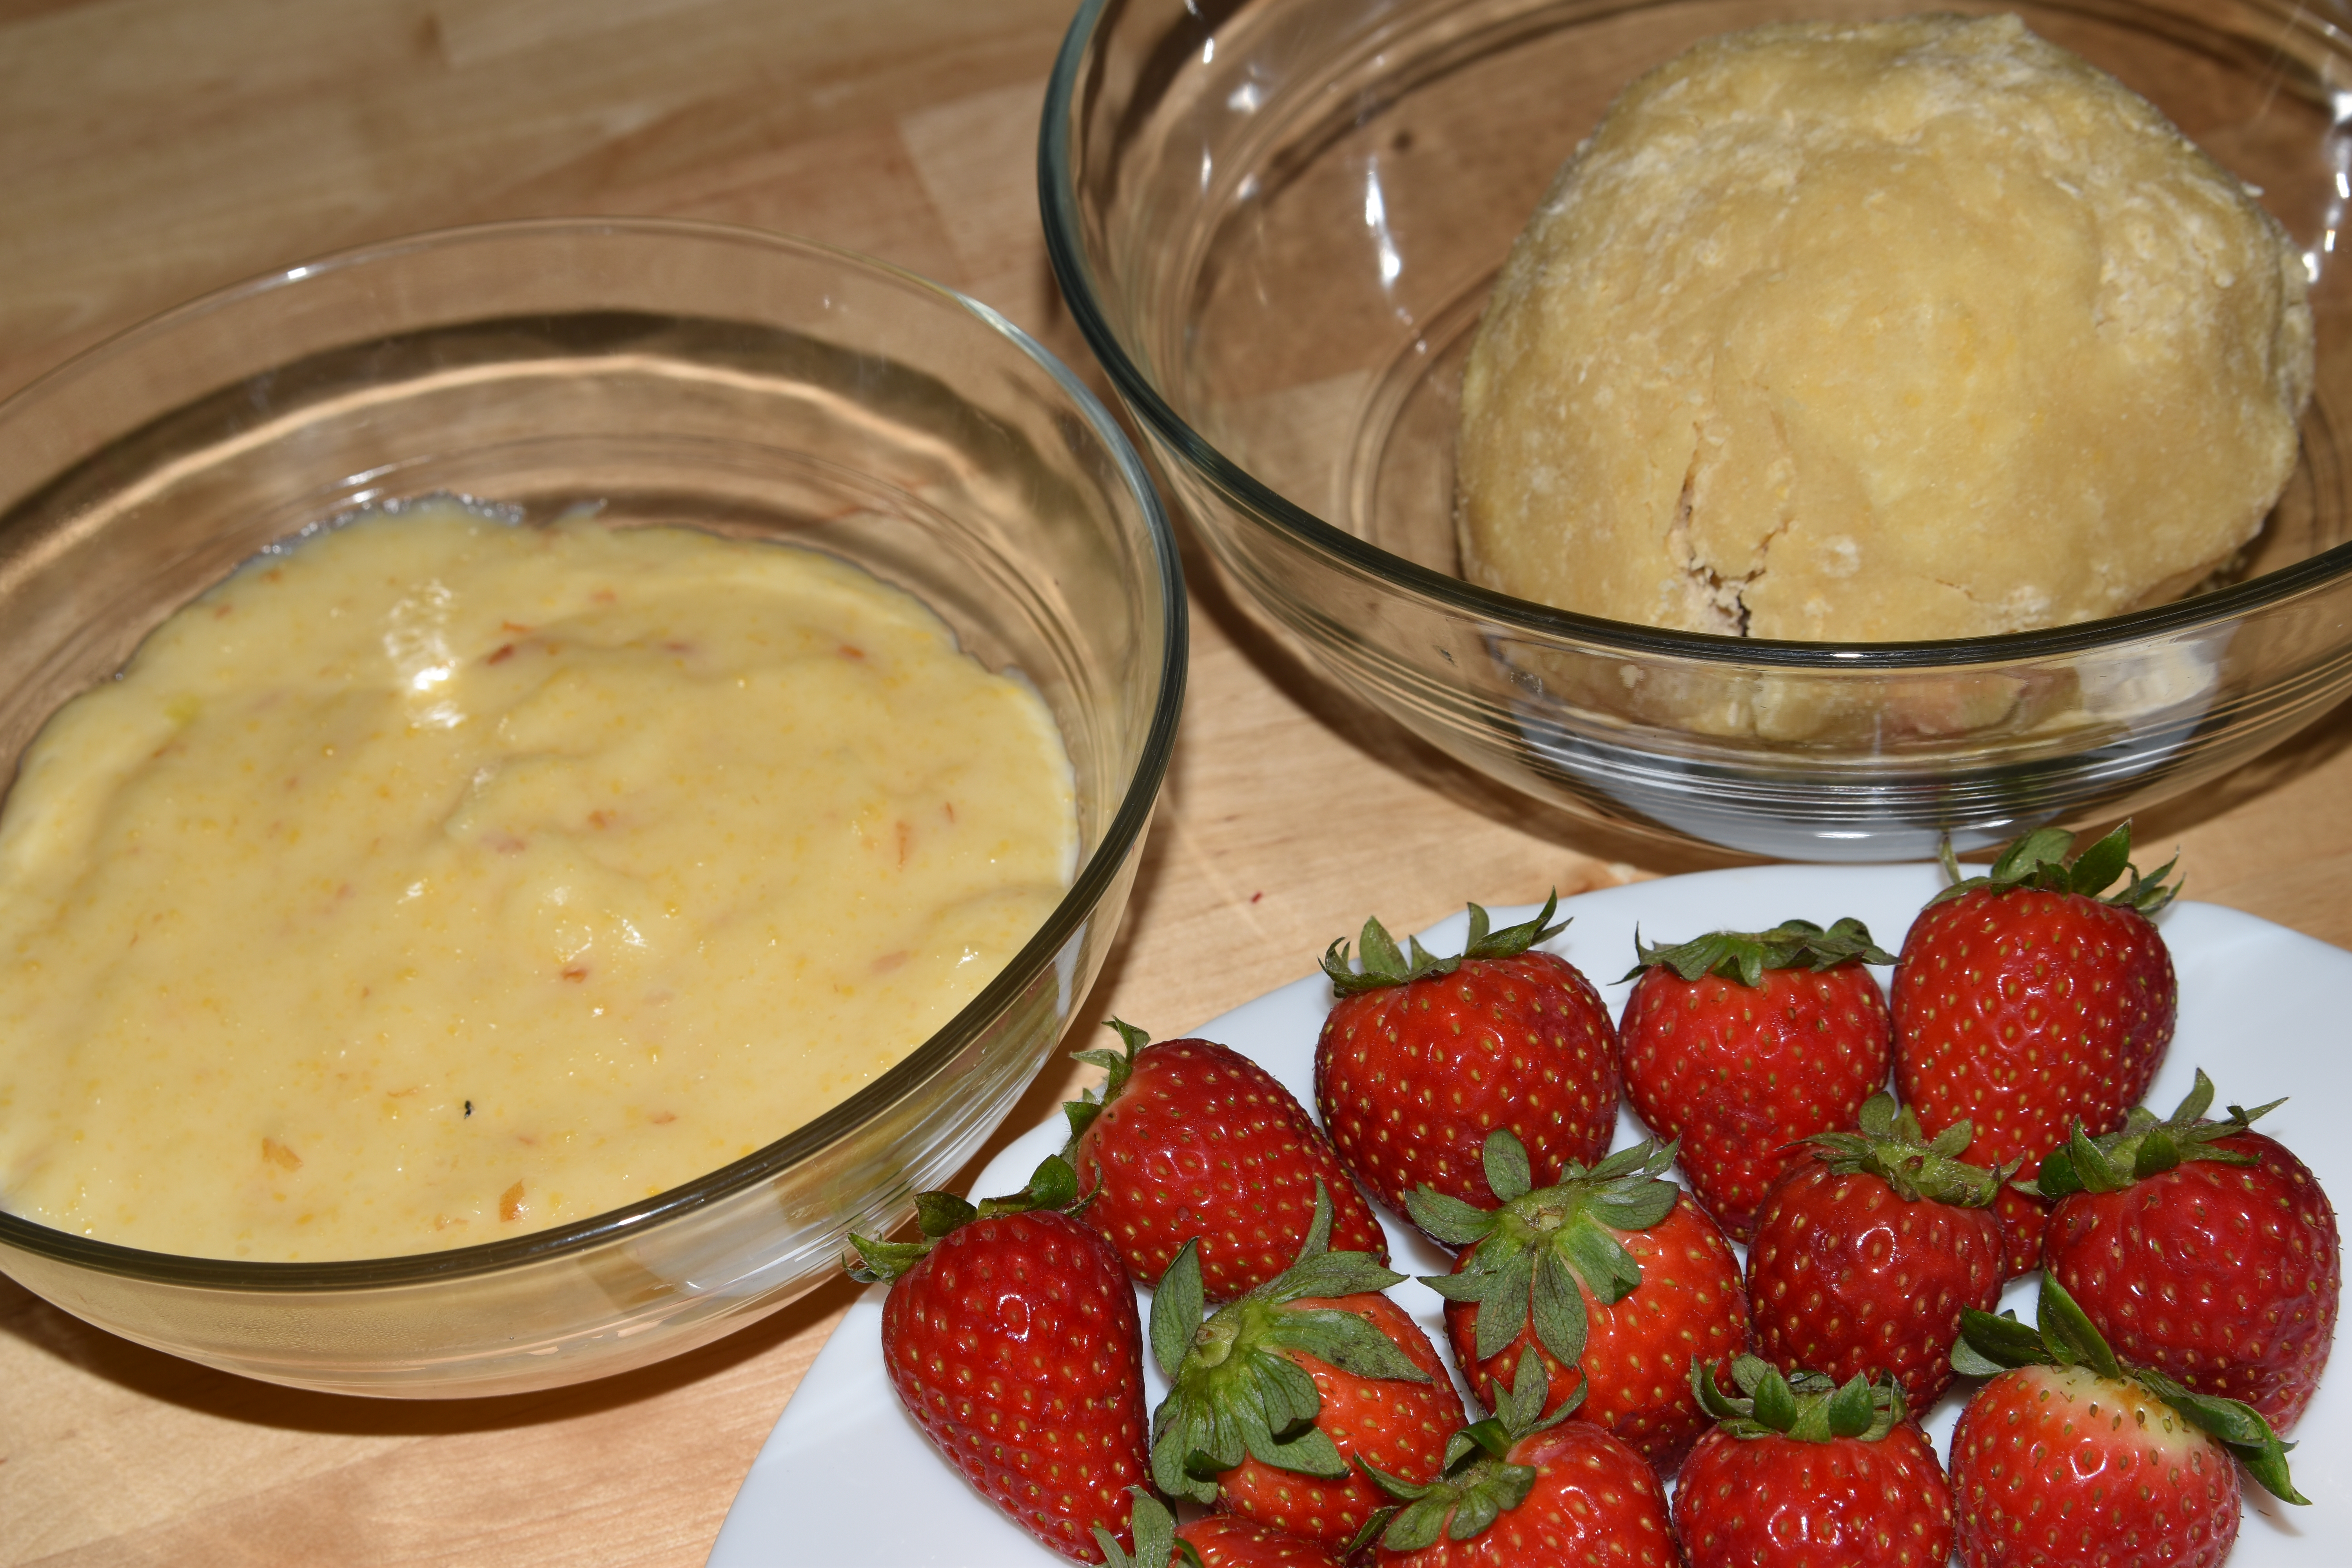 In two separate glass bowls, there is some custard and a ball of pie dough. Next to them, to the right, there is a white plate with strawberries.